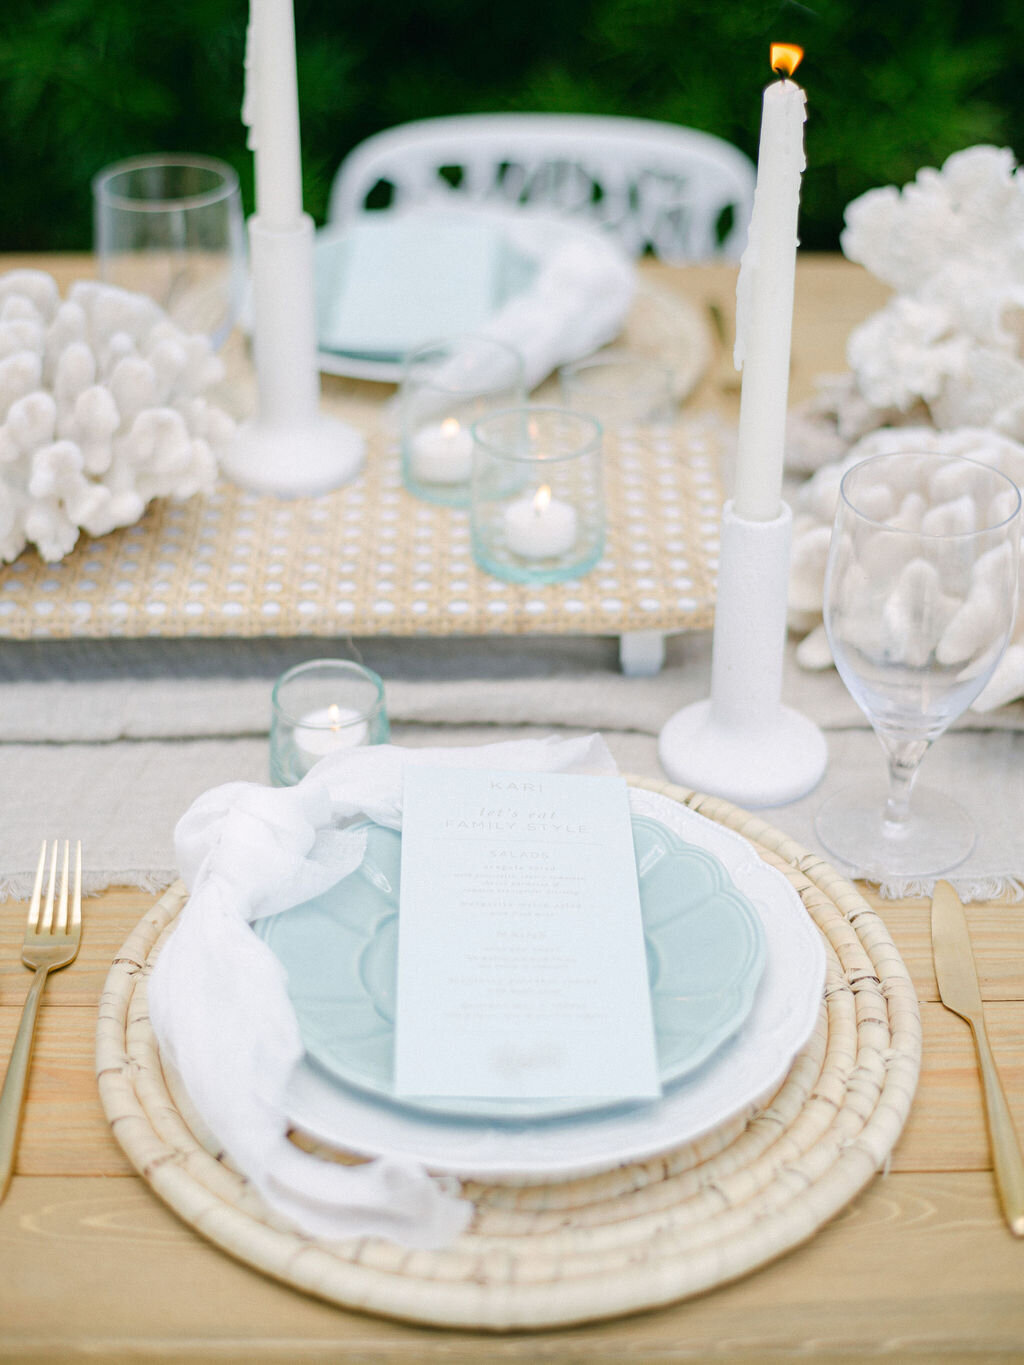 Wedding place setting with Sea glass inspired wedding colors